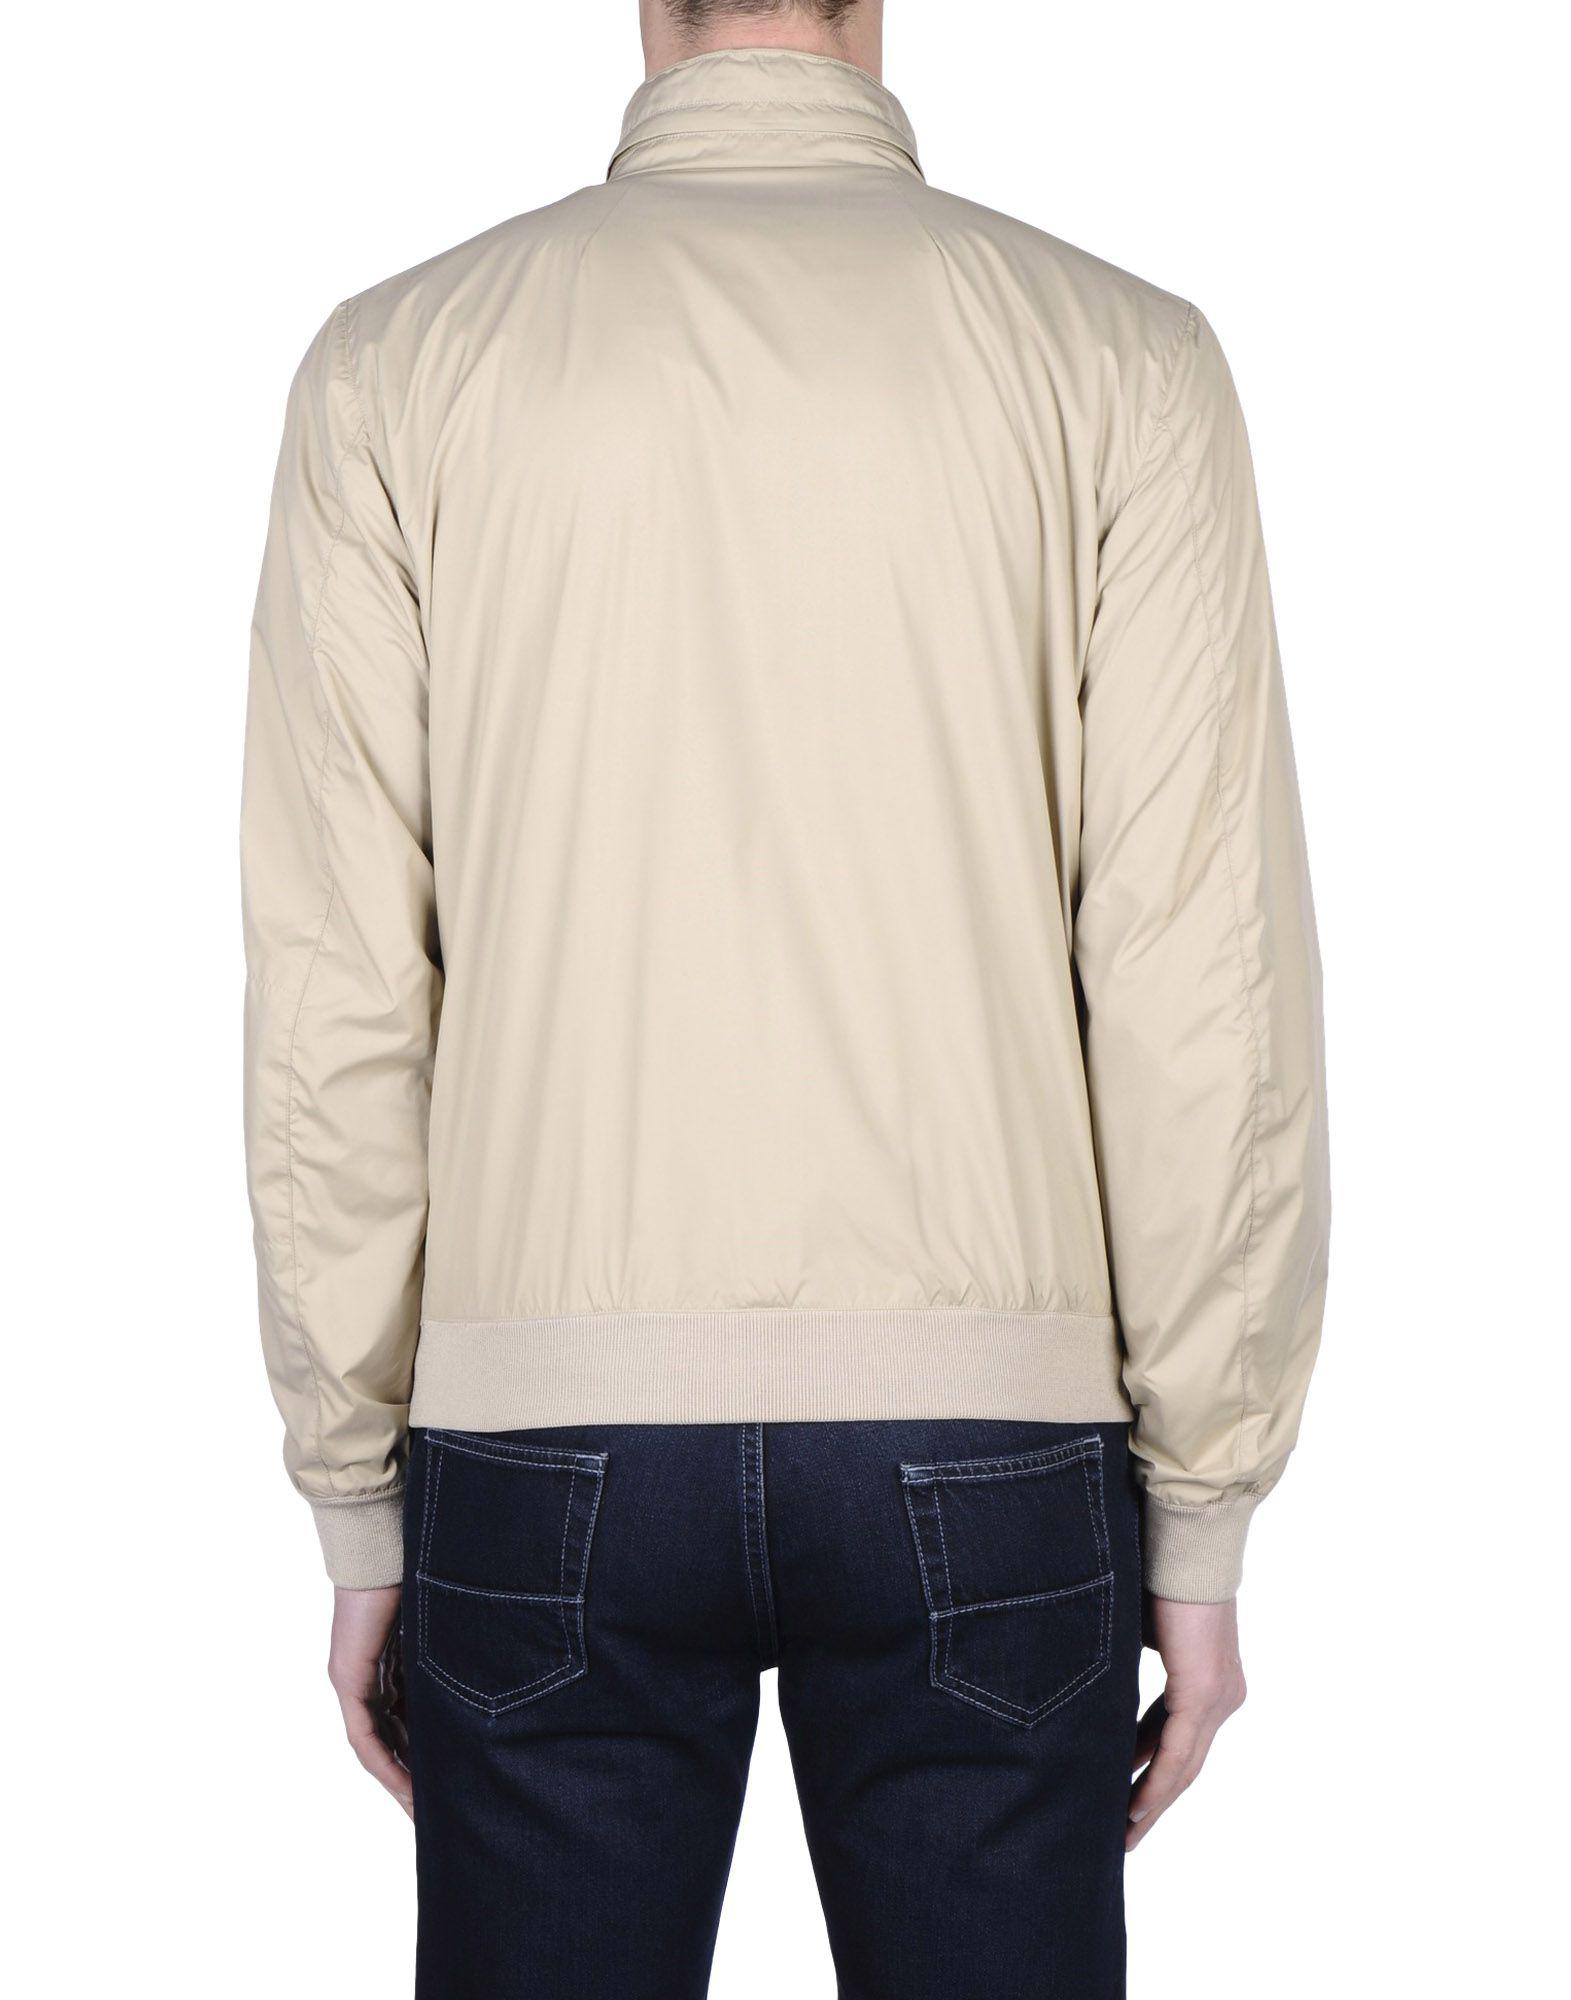 Mauro Grifoni Synthetic Jacket in Khaki (Natural) for Men - Lyst